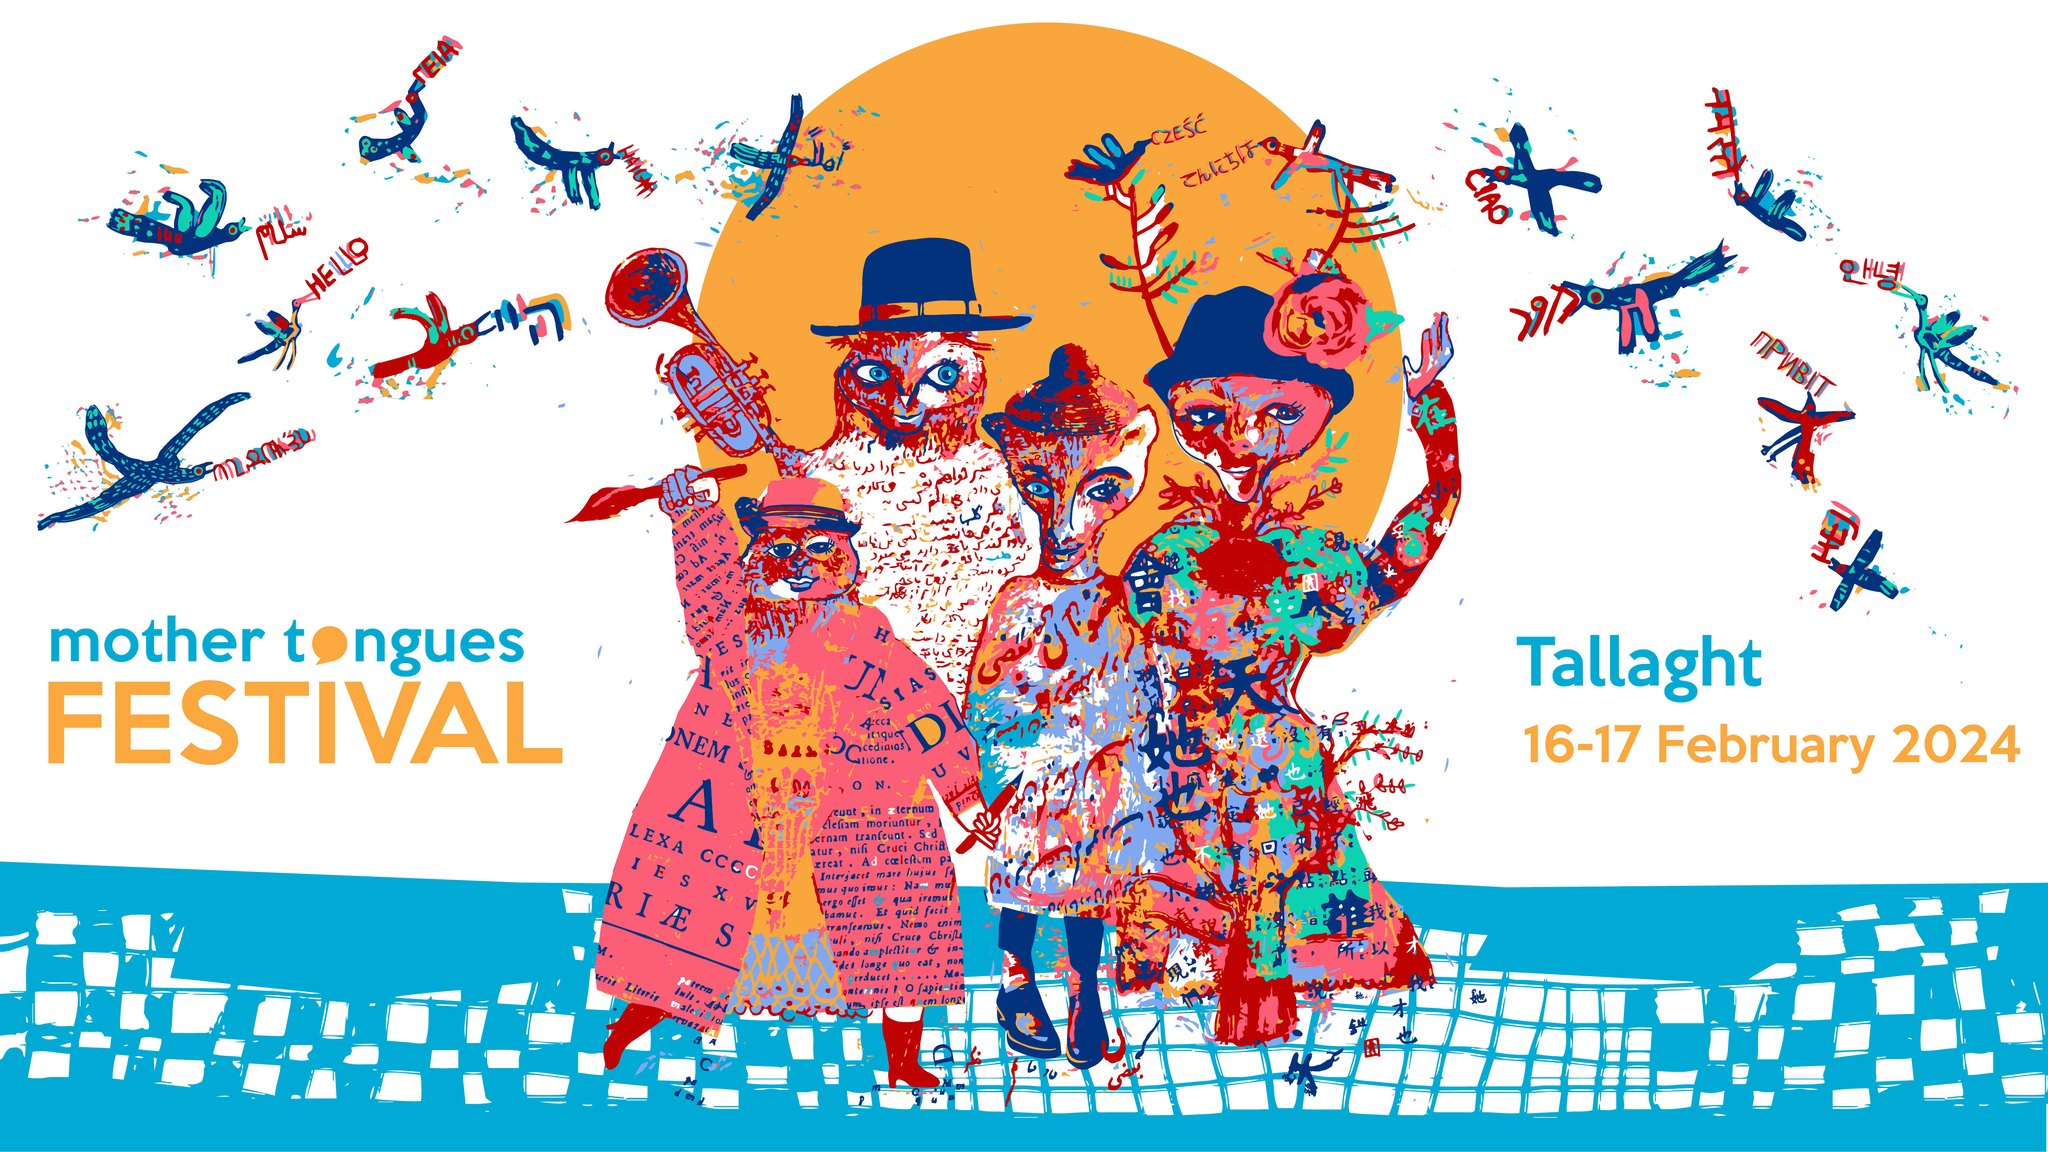 Mother Tongues Festival is the largest festival celebrating linguistic diversity